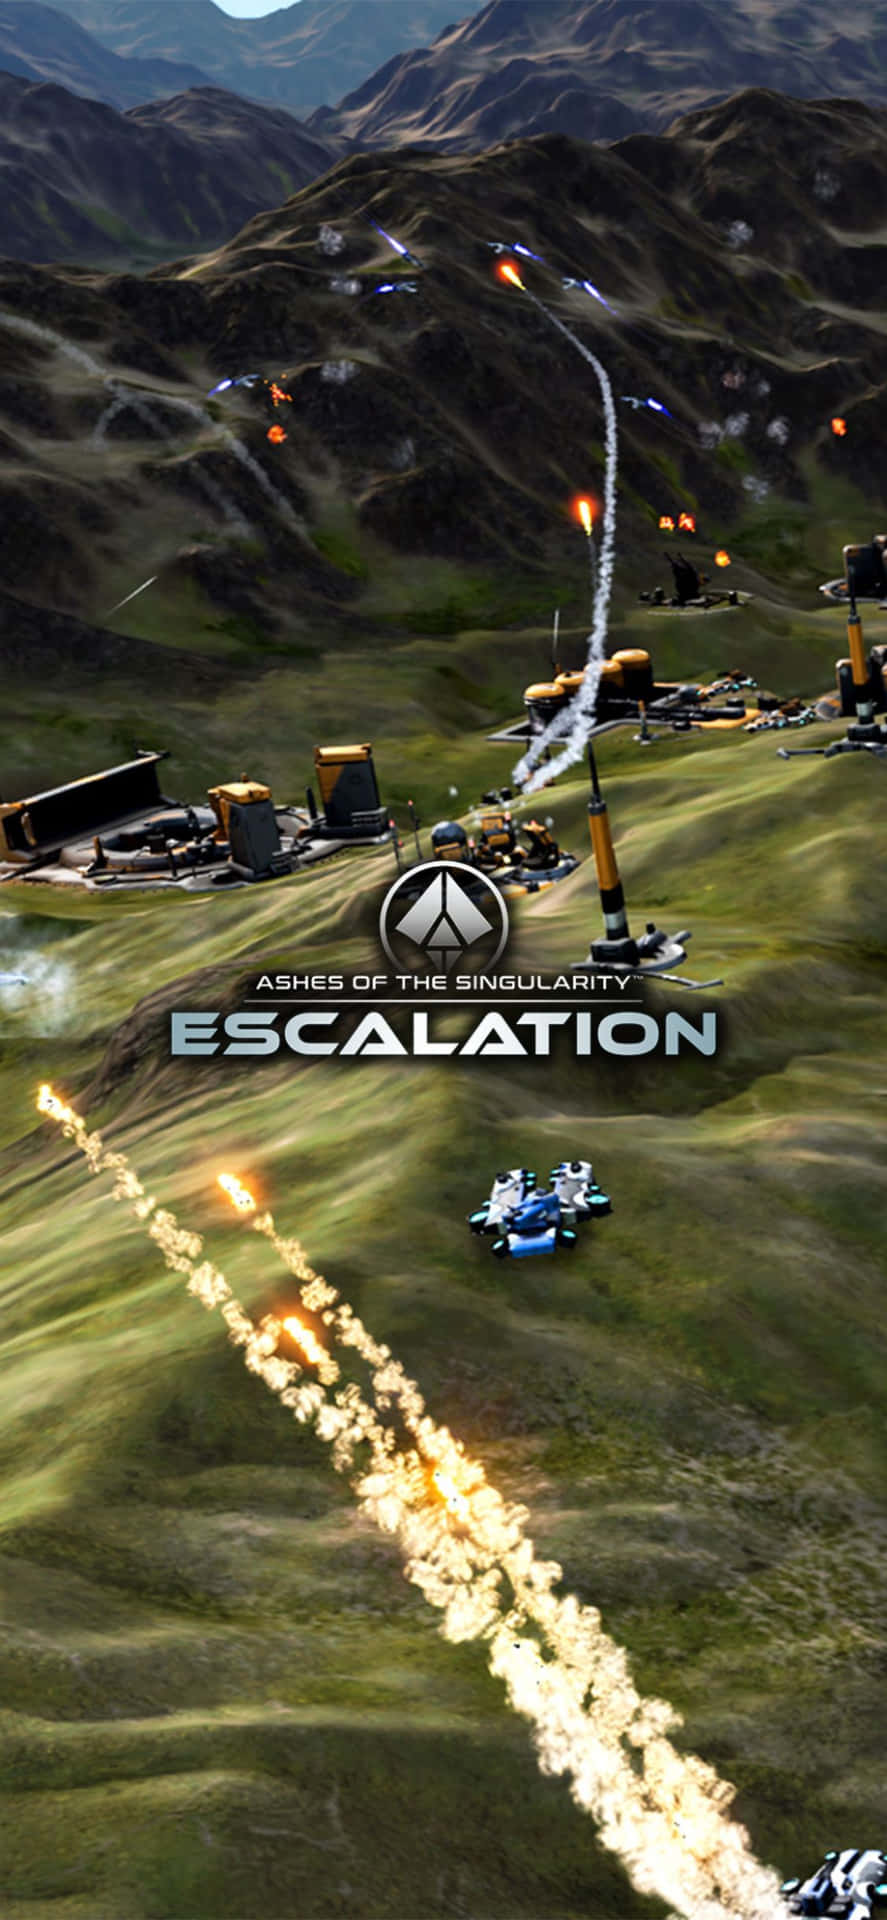 Giocacon L'iphone X E Ashes Of The Singularity Escalation.